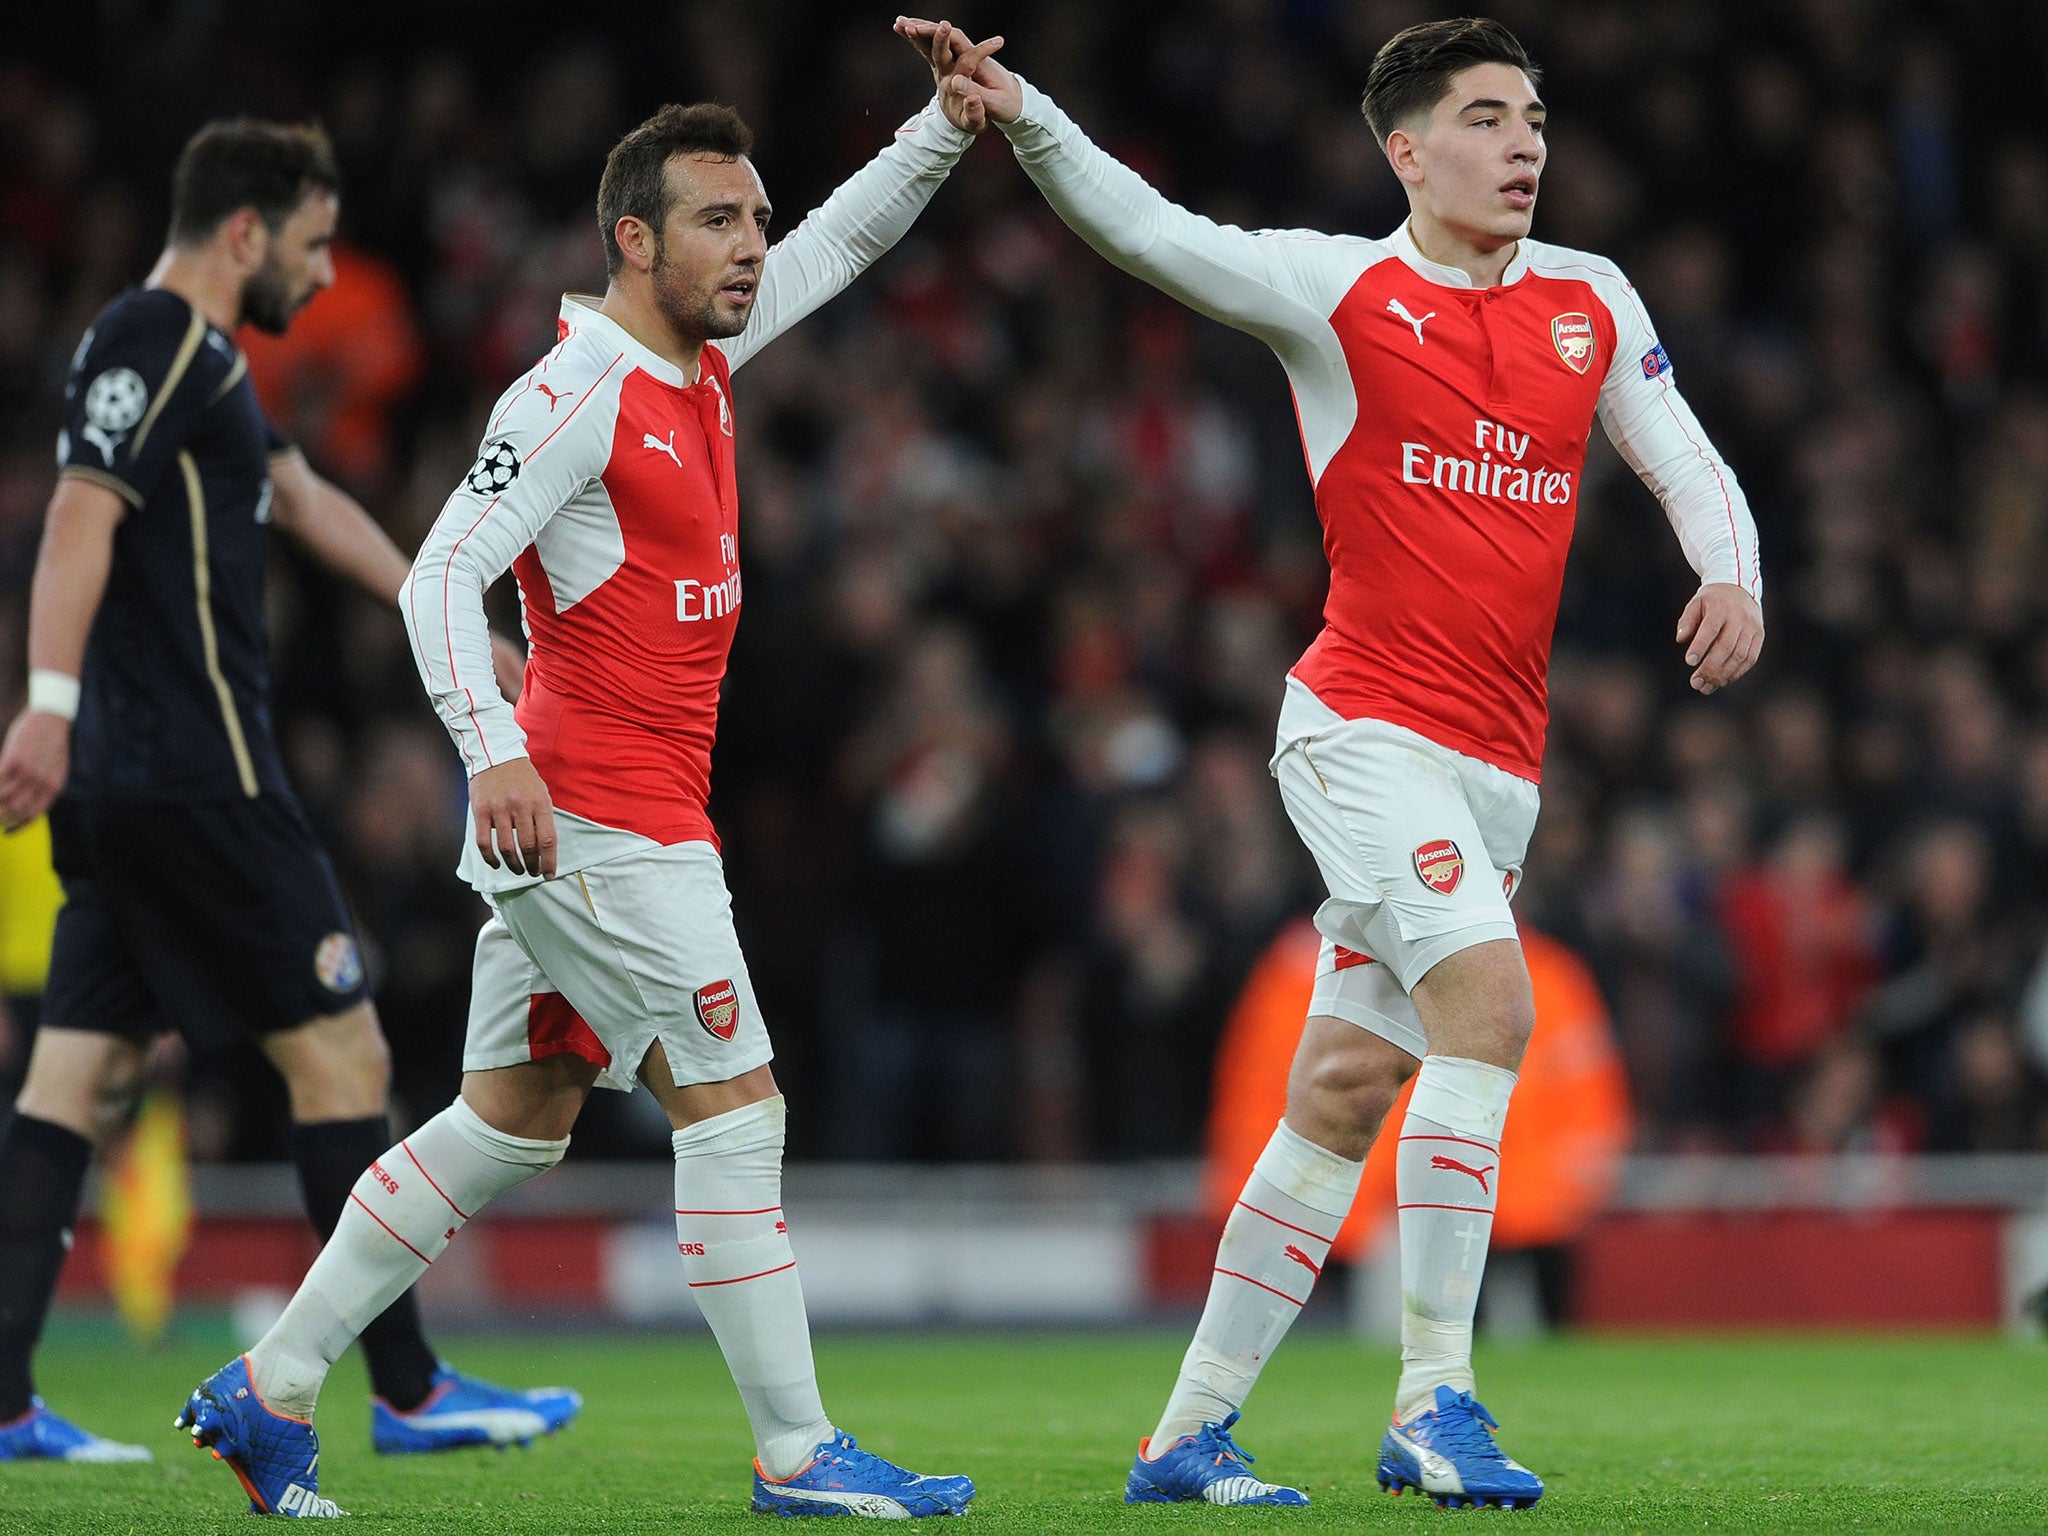 The Spanish duo won't feature for Arsenal this Sunday against Bournemouth